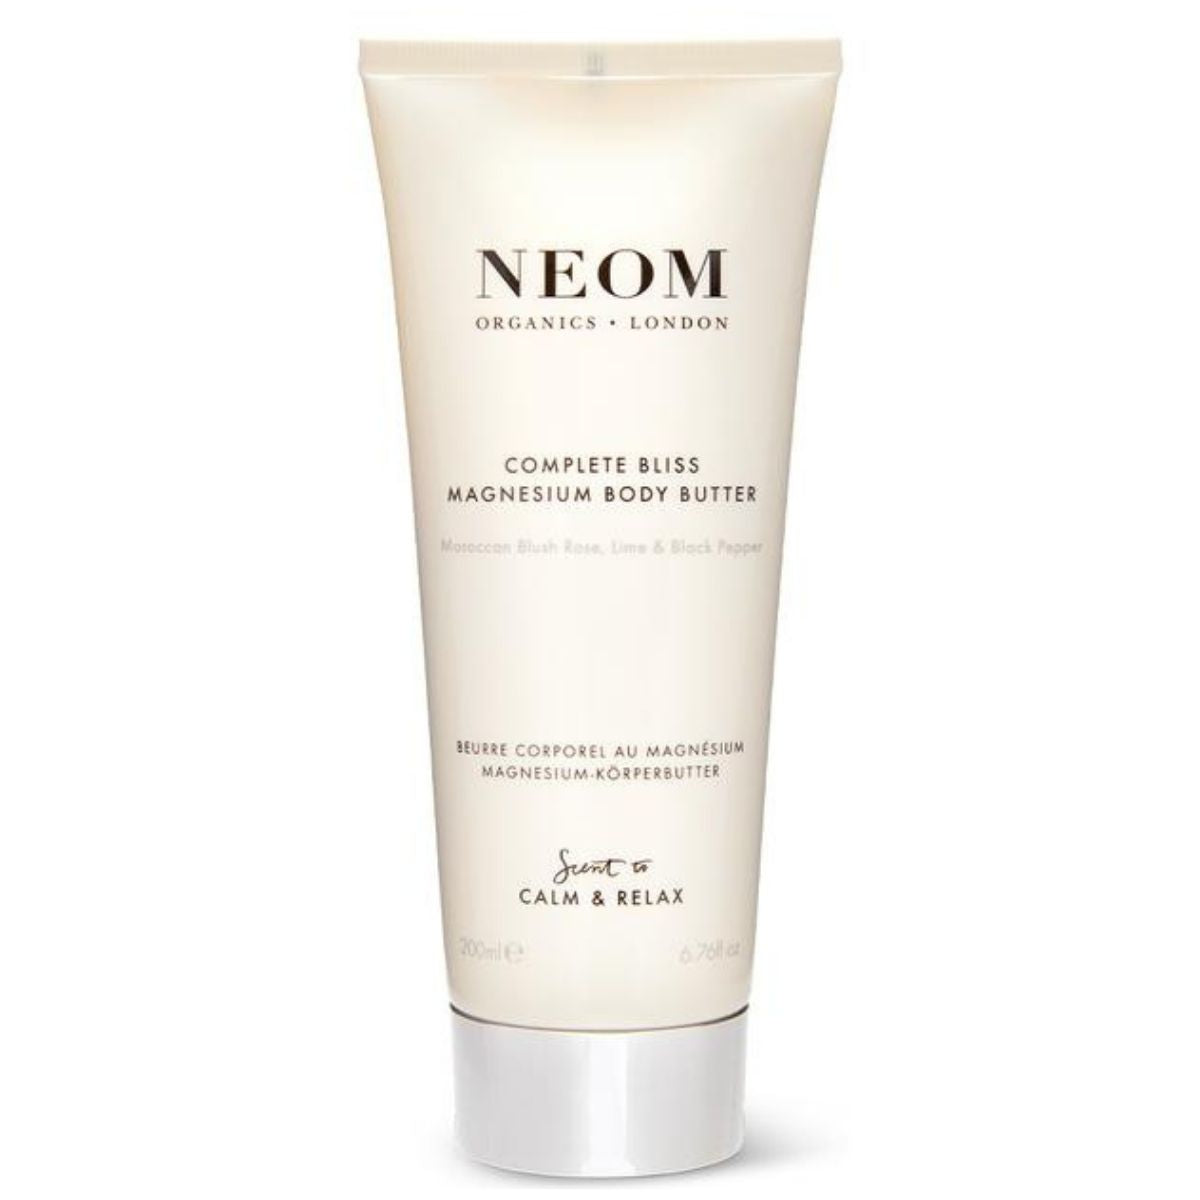 Neom Complete Bliss Magnesium Body Butter